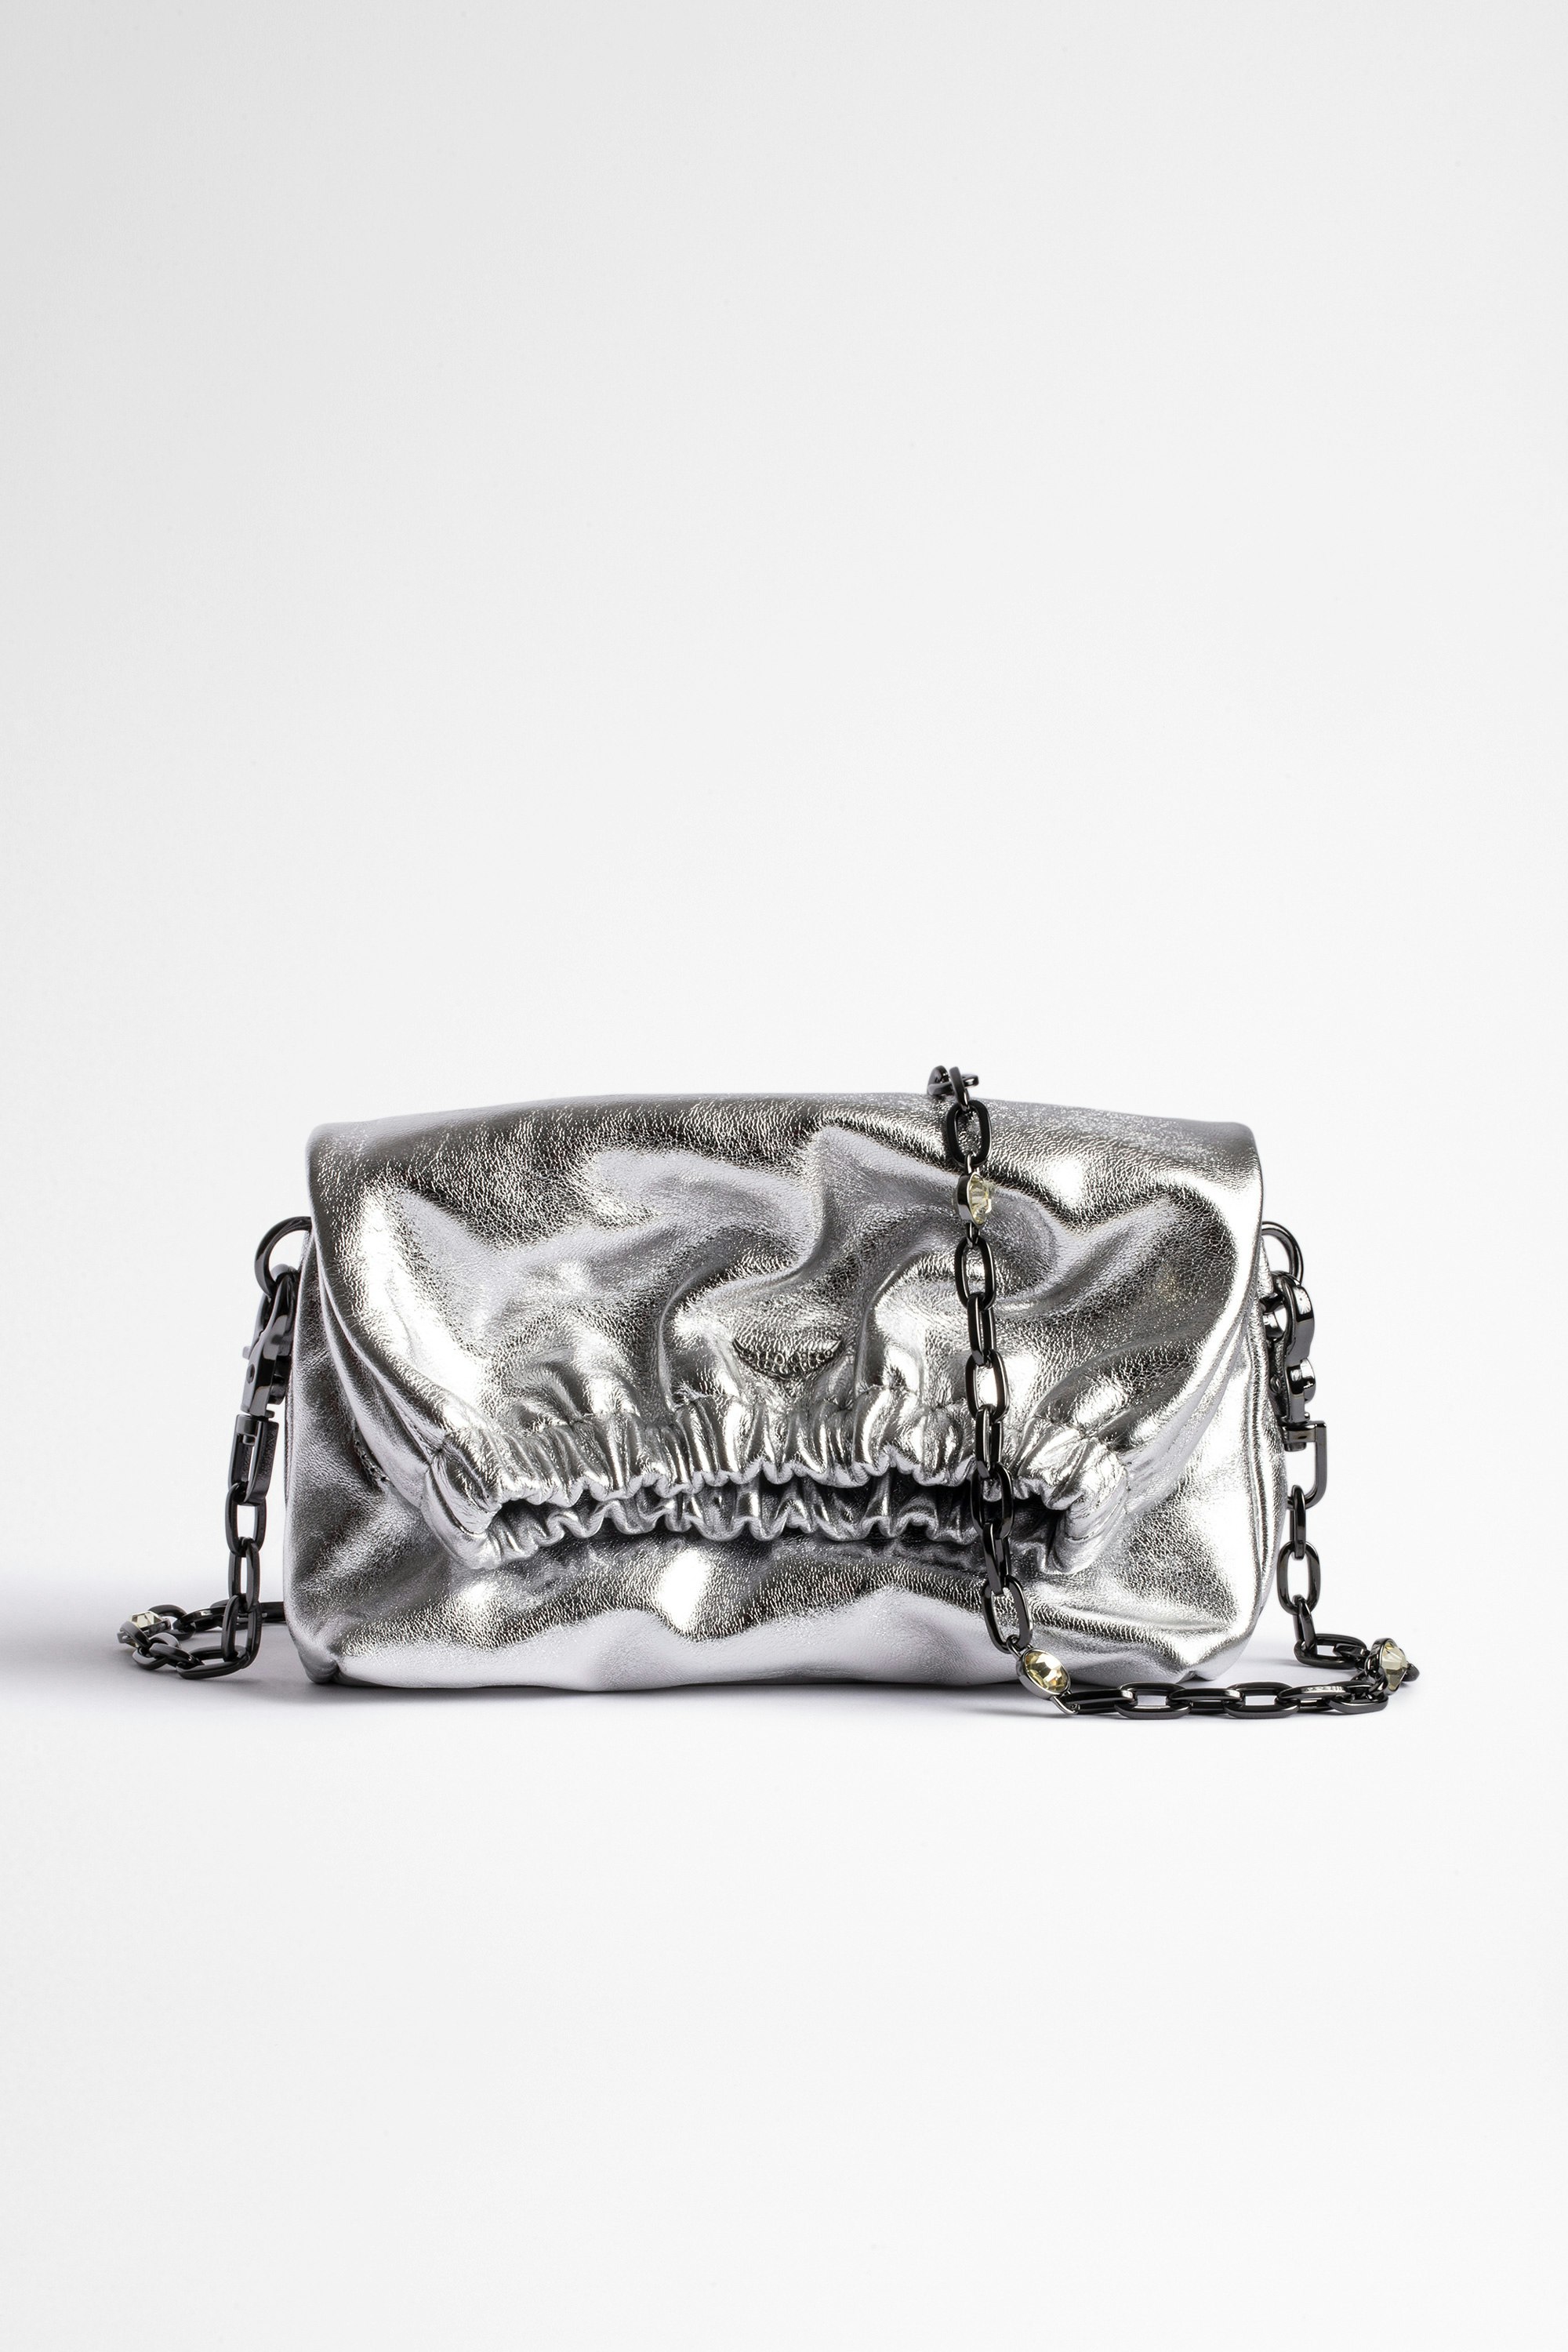 Rockyssime XS Metallic バッグ Women's lambskin leather clutch bag in silver with silver chain handle